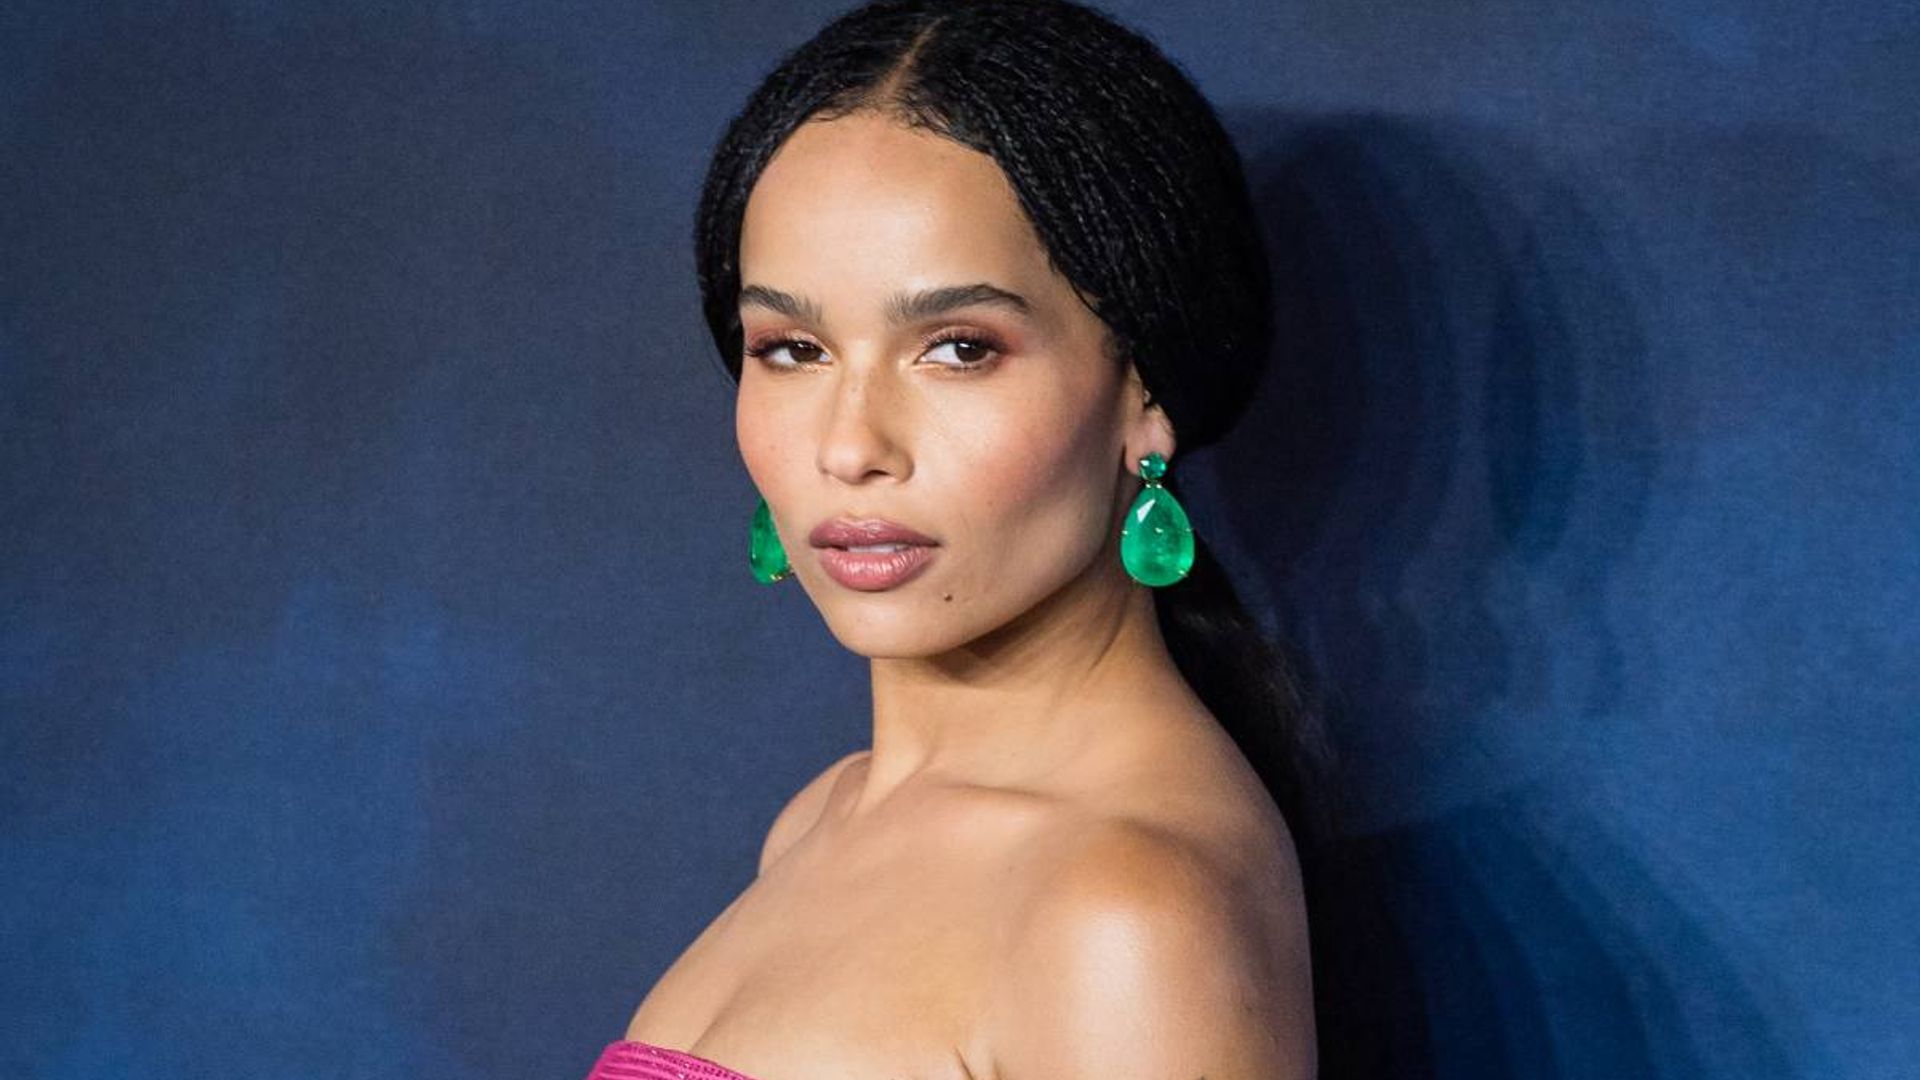 Zoe Kravitz’s showstopping dress on outing with Channing Tatum is so perfect for date nights